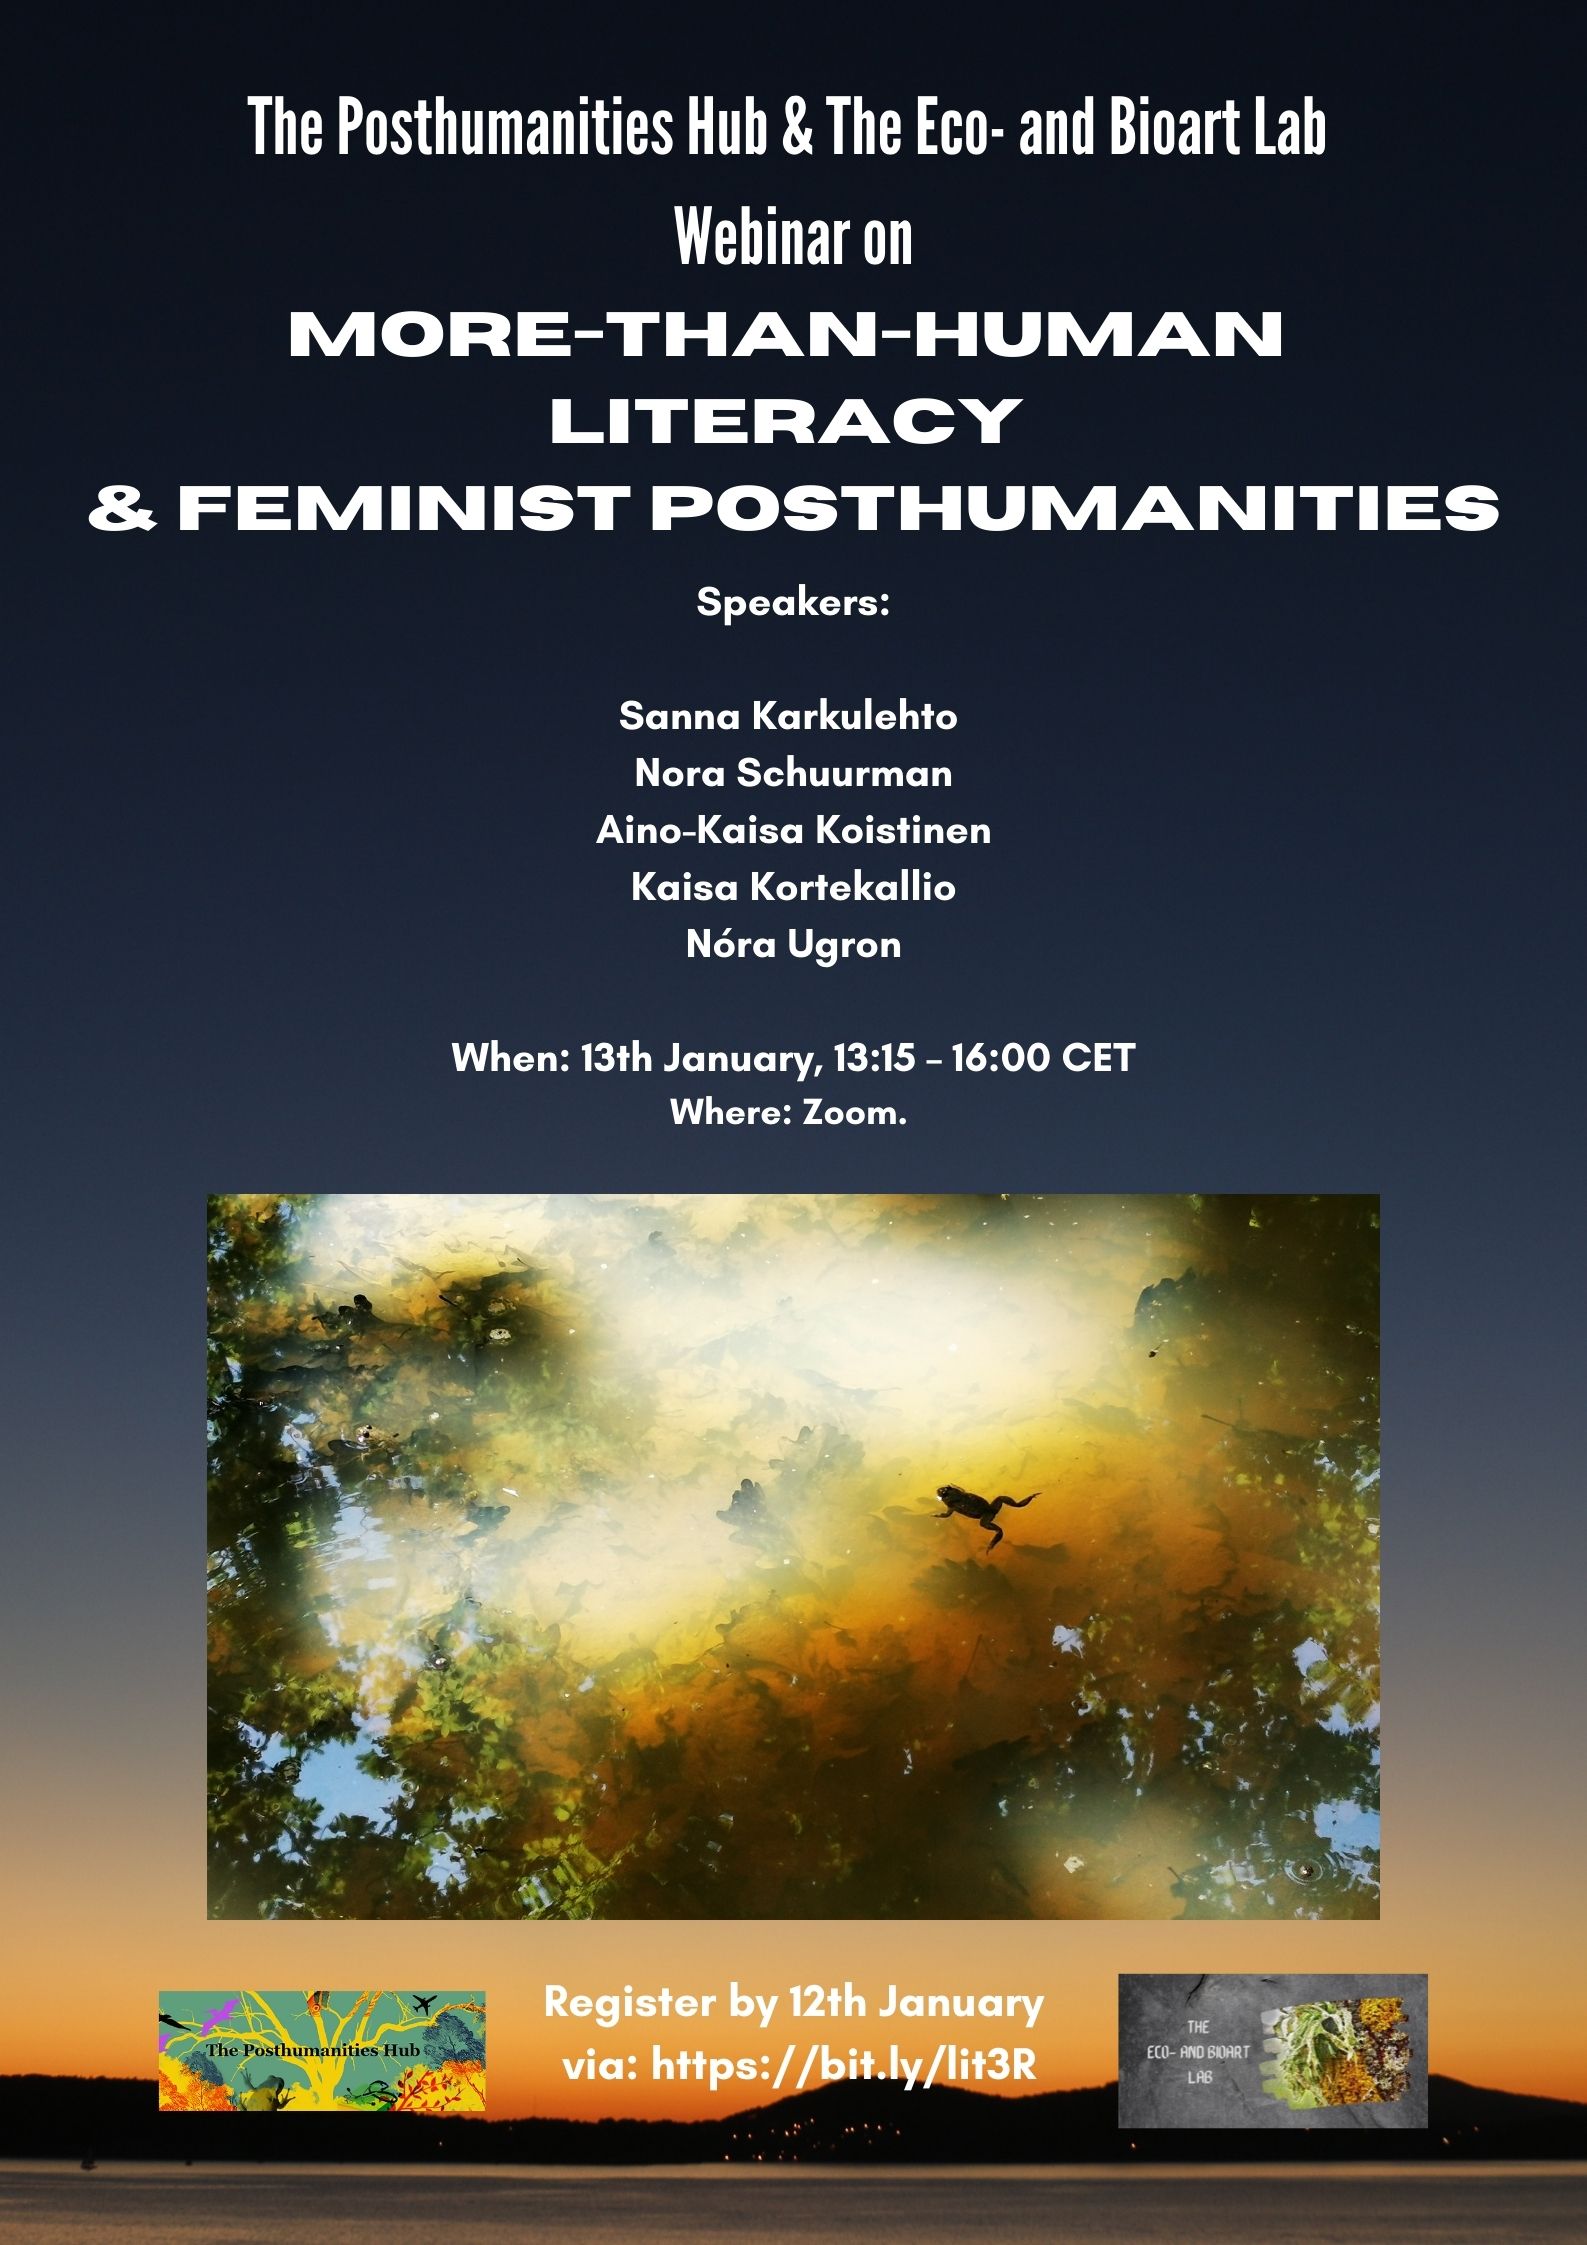 PH and EBL Webinar on ‘MORE-THAN-HUMAN LITERACY & FEMINIST POSTHUMANITIES’, 13th January 13.15-16 CET